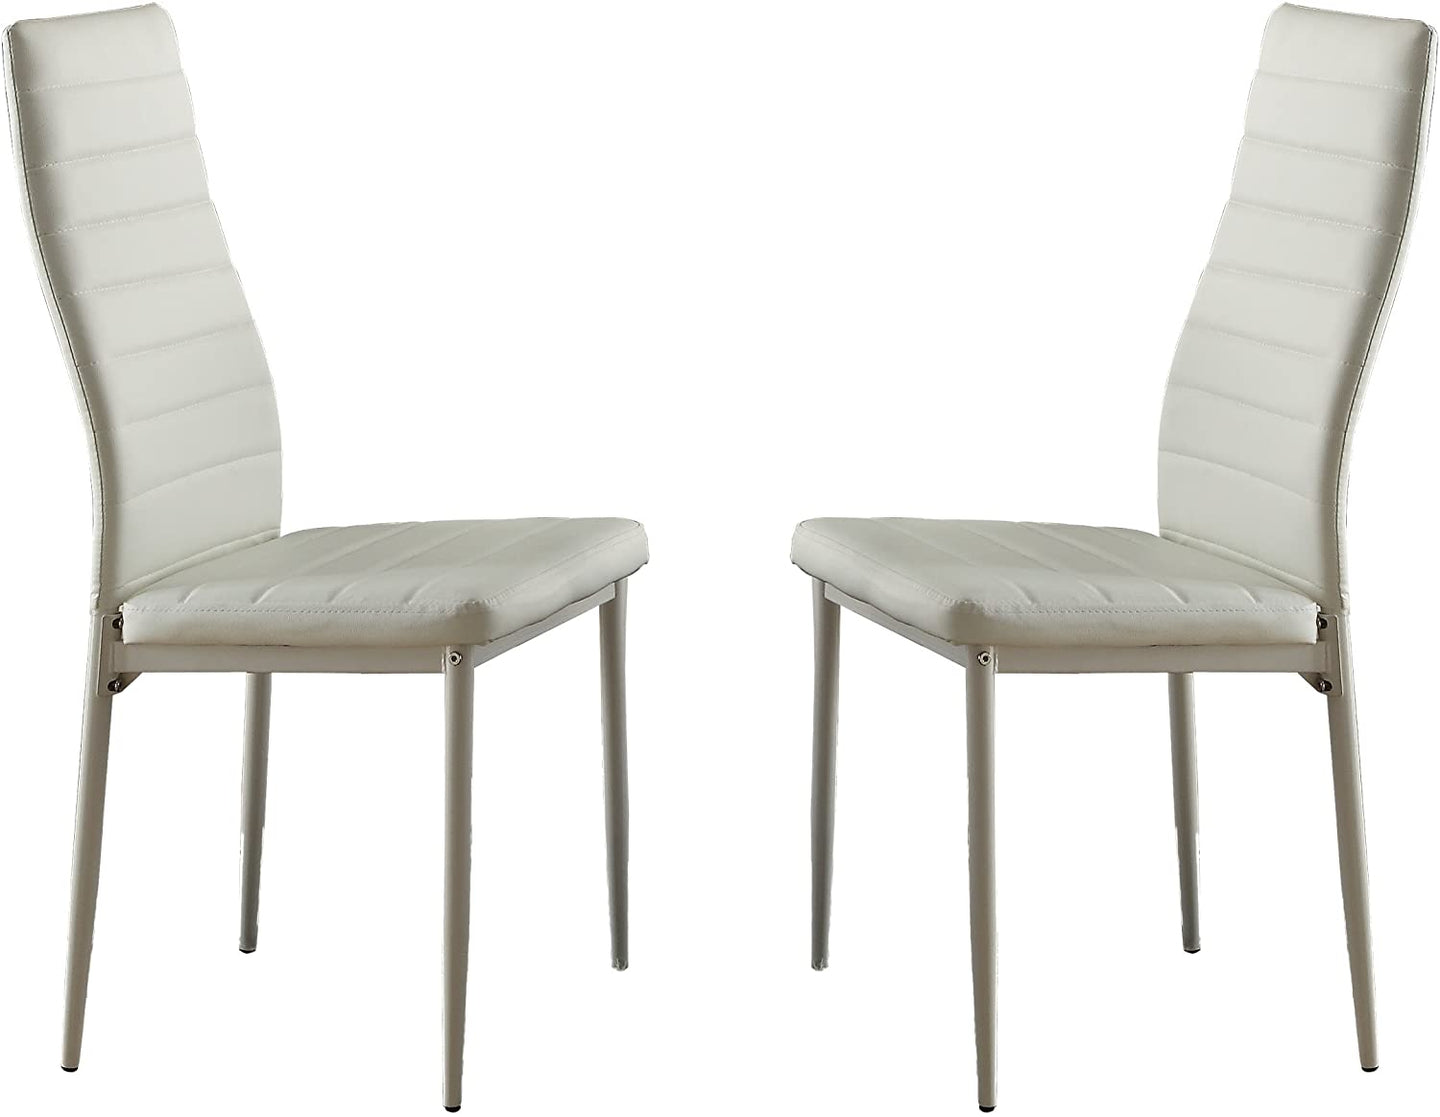 Aubree Tufted Upholstered Side Chair (Set of 2), #TB79